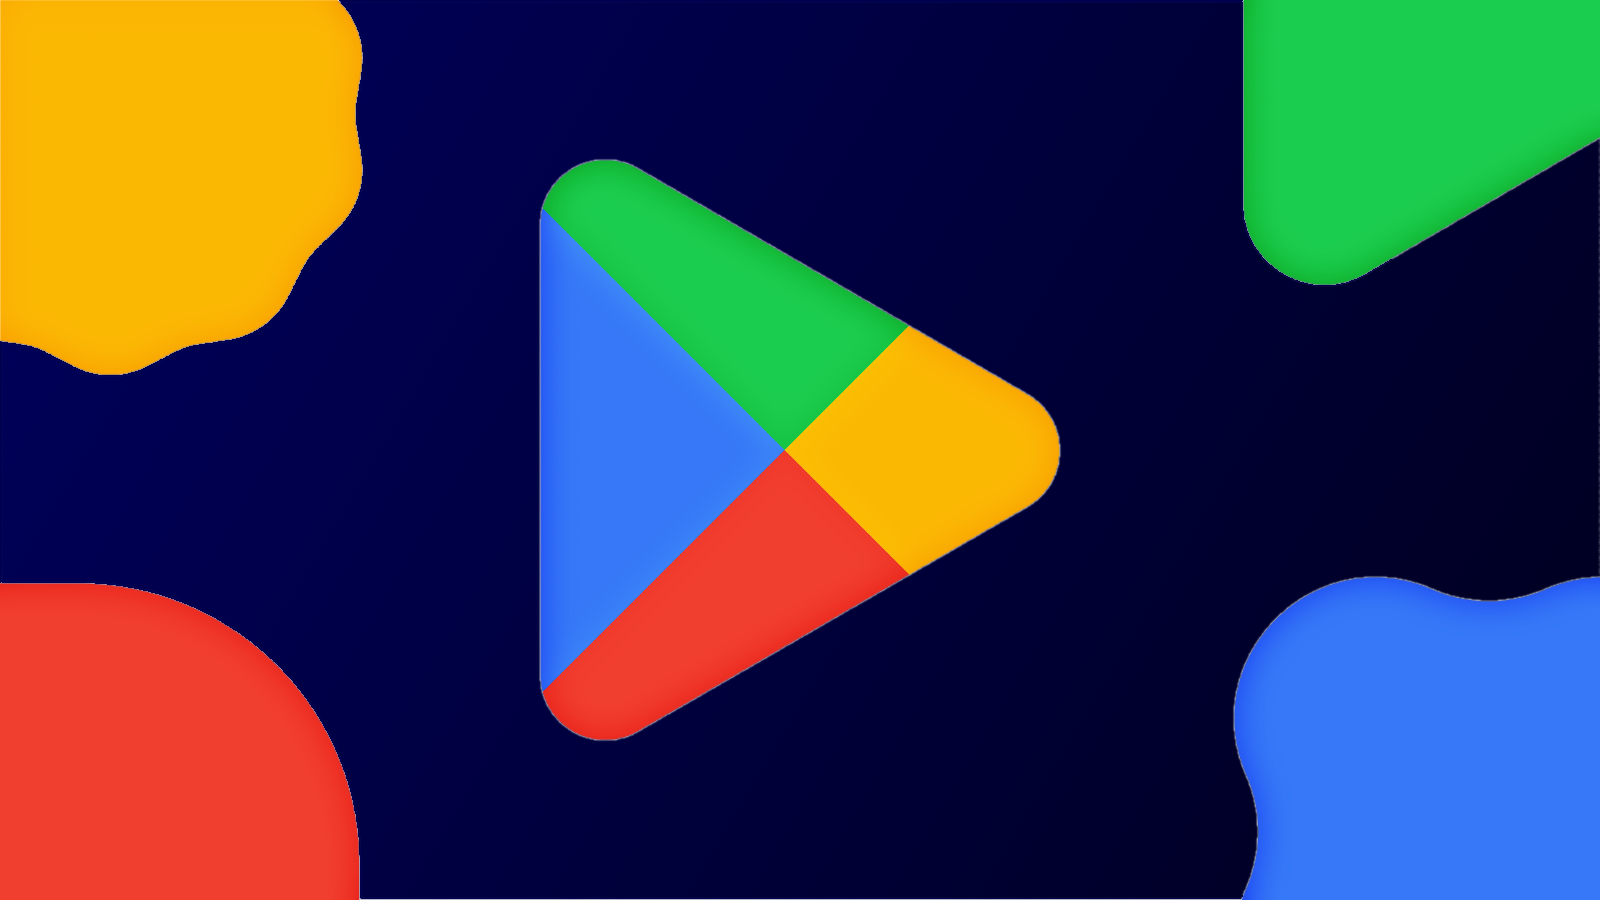 Apps Android no Google Play